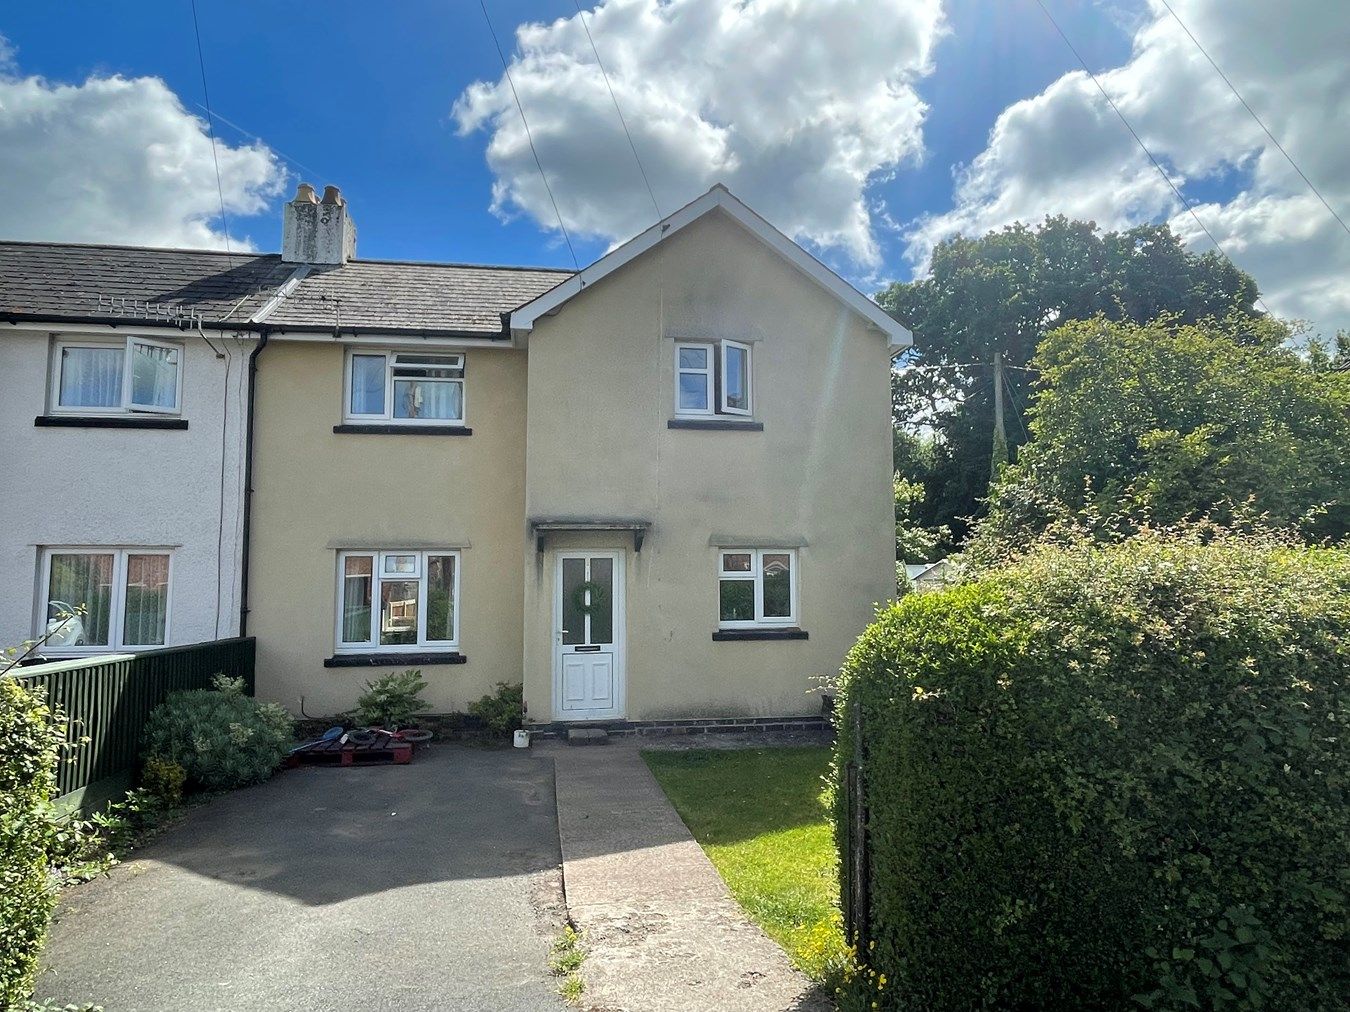 3 bed semi-detached house for sale in Neuadd Terrace, Bronllys, Brecon ...